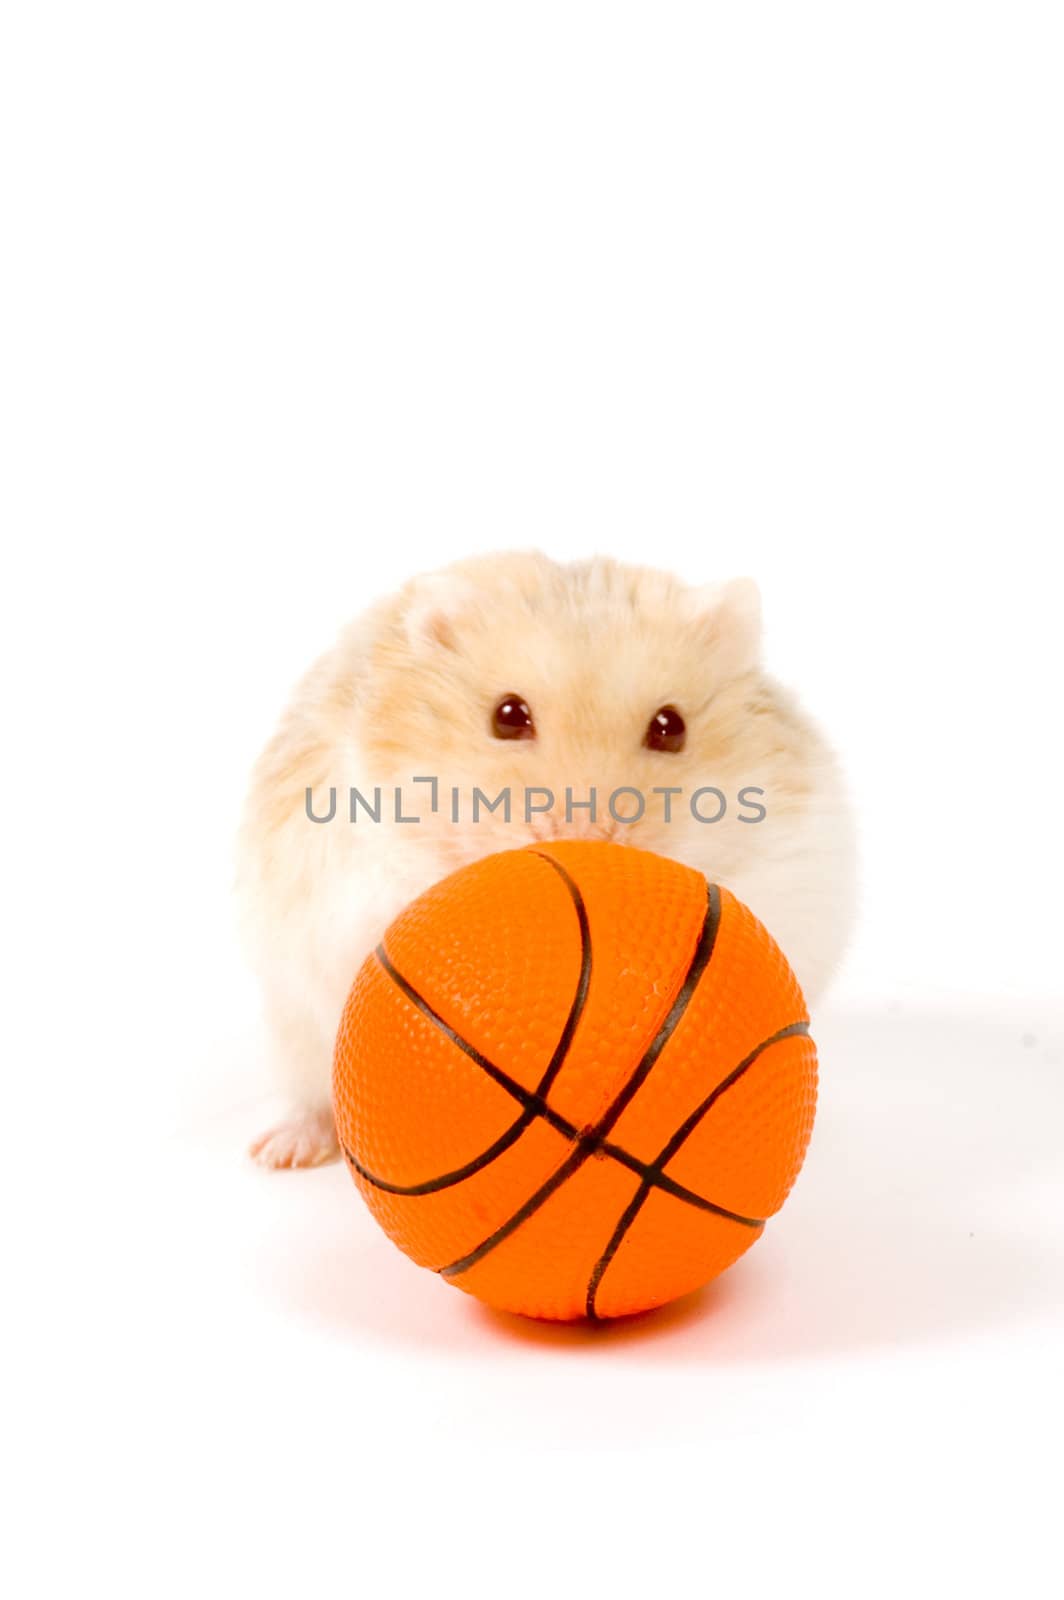 little hamster is playing with basketball (focus on ball) by ladyminnie